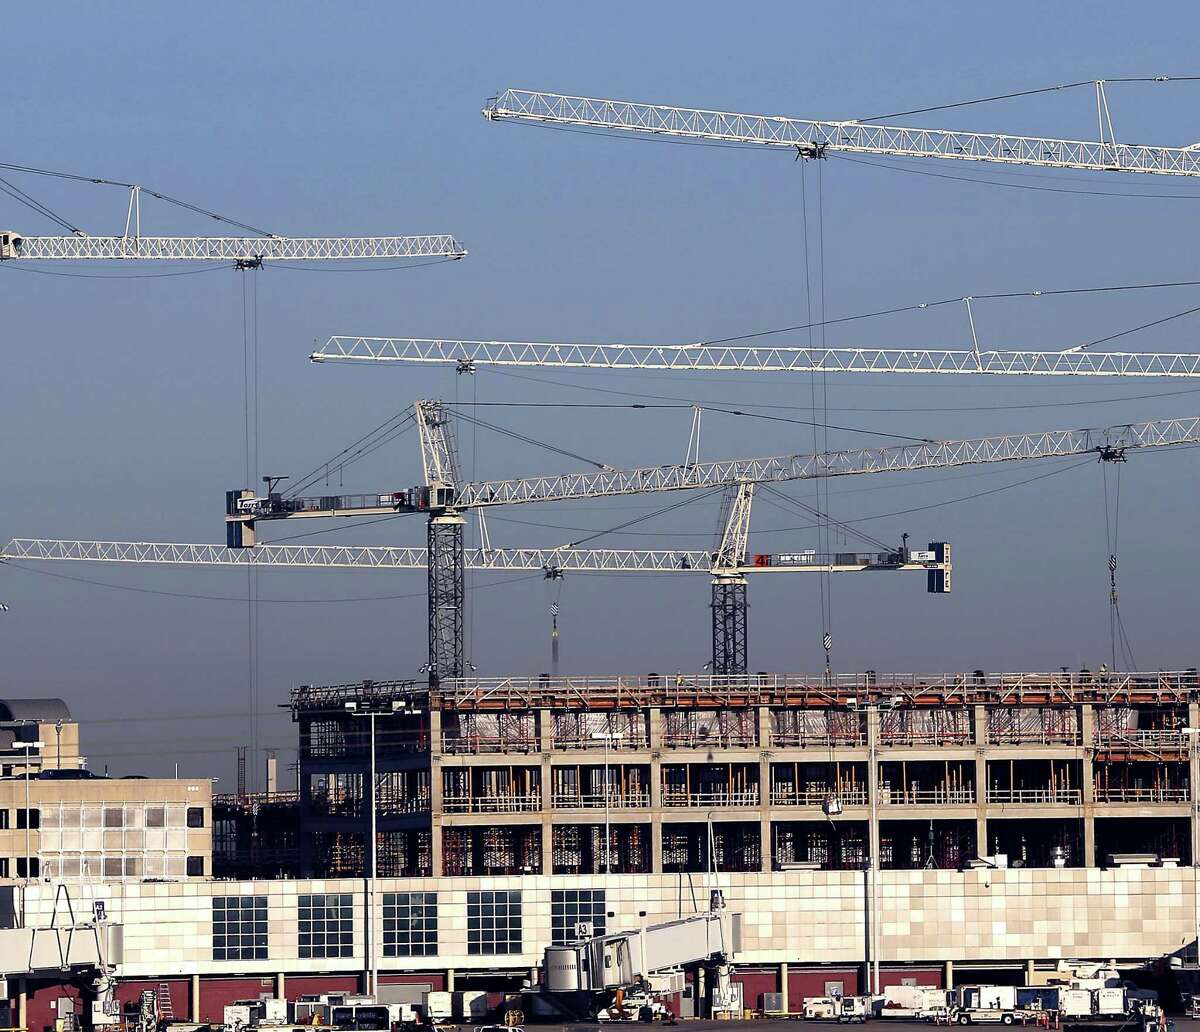 The booms from five tower cranes are seen Wednesday, Dec, 21, 2016 at the San Antonio International Airport as they help construct improvements at the airport, such as a new parking garage.